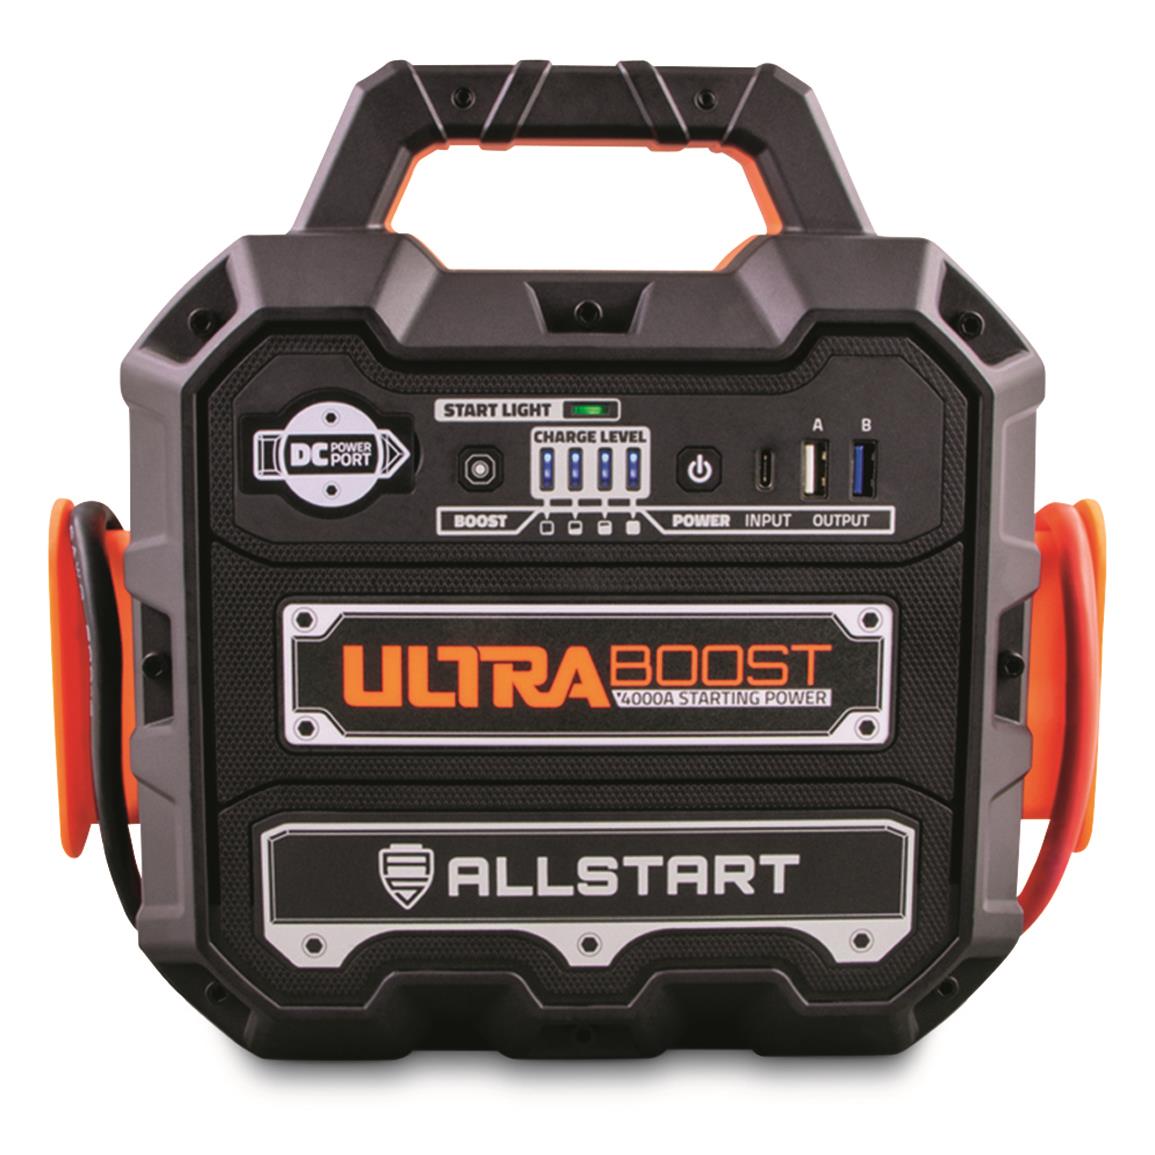 AllStart Boost Ultra 590 Lithium-ion Jump Starter and Charger